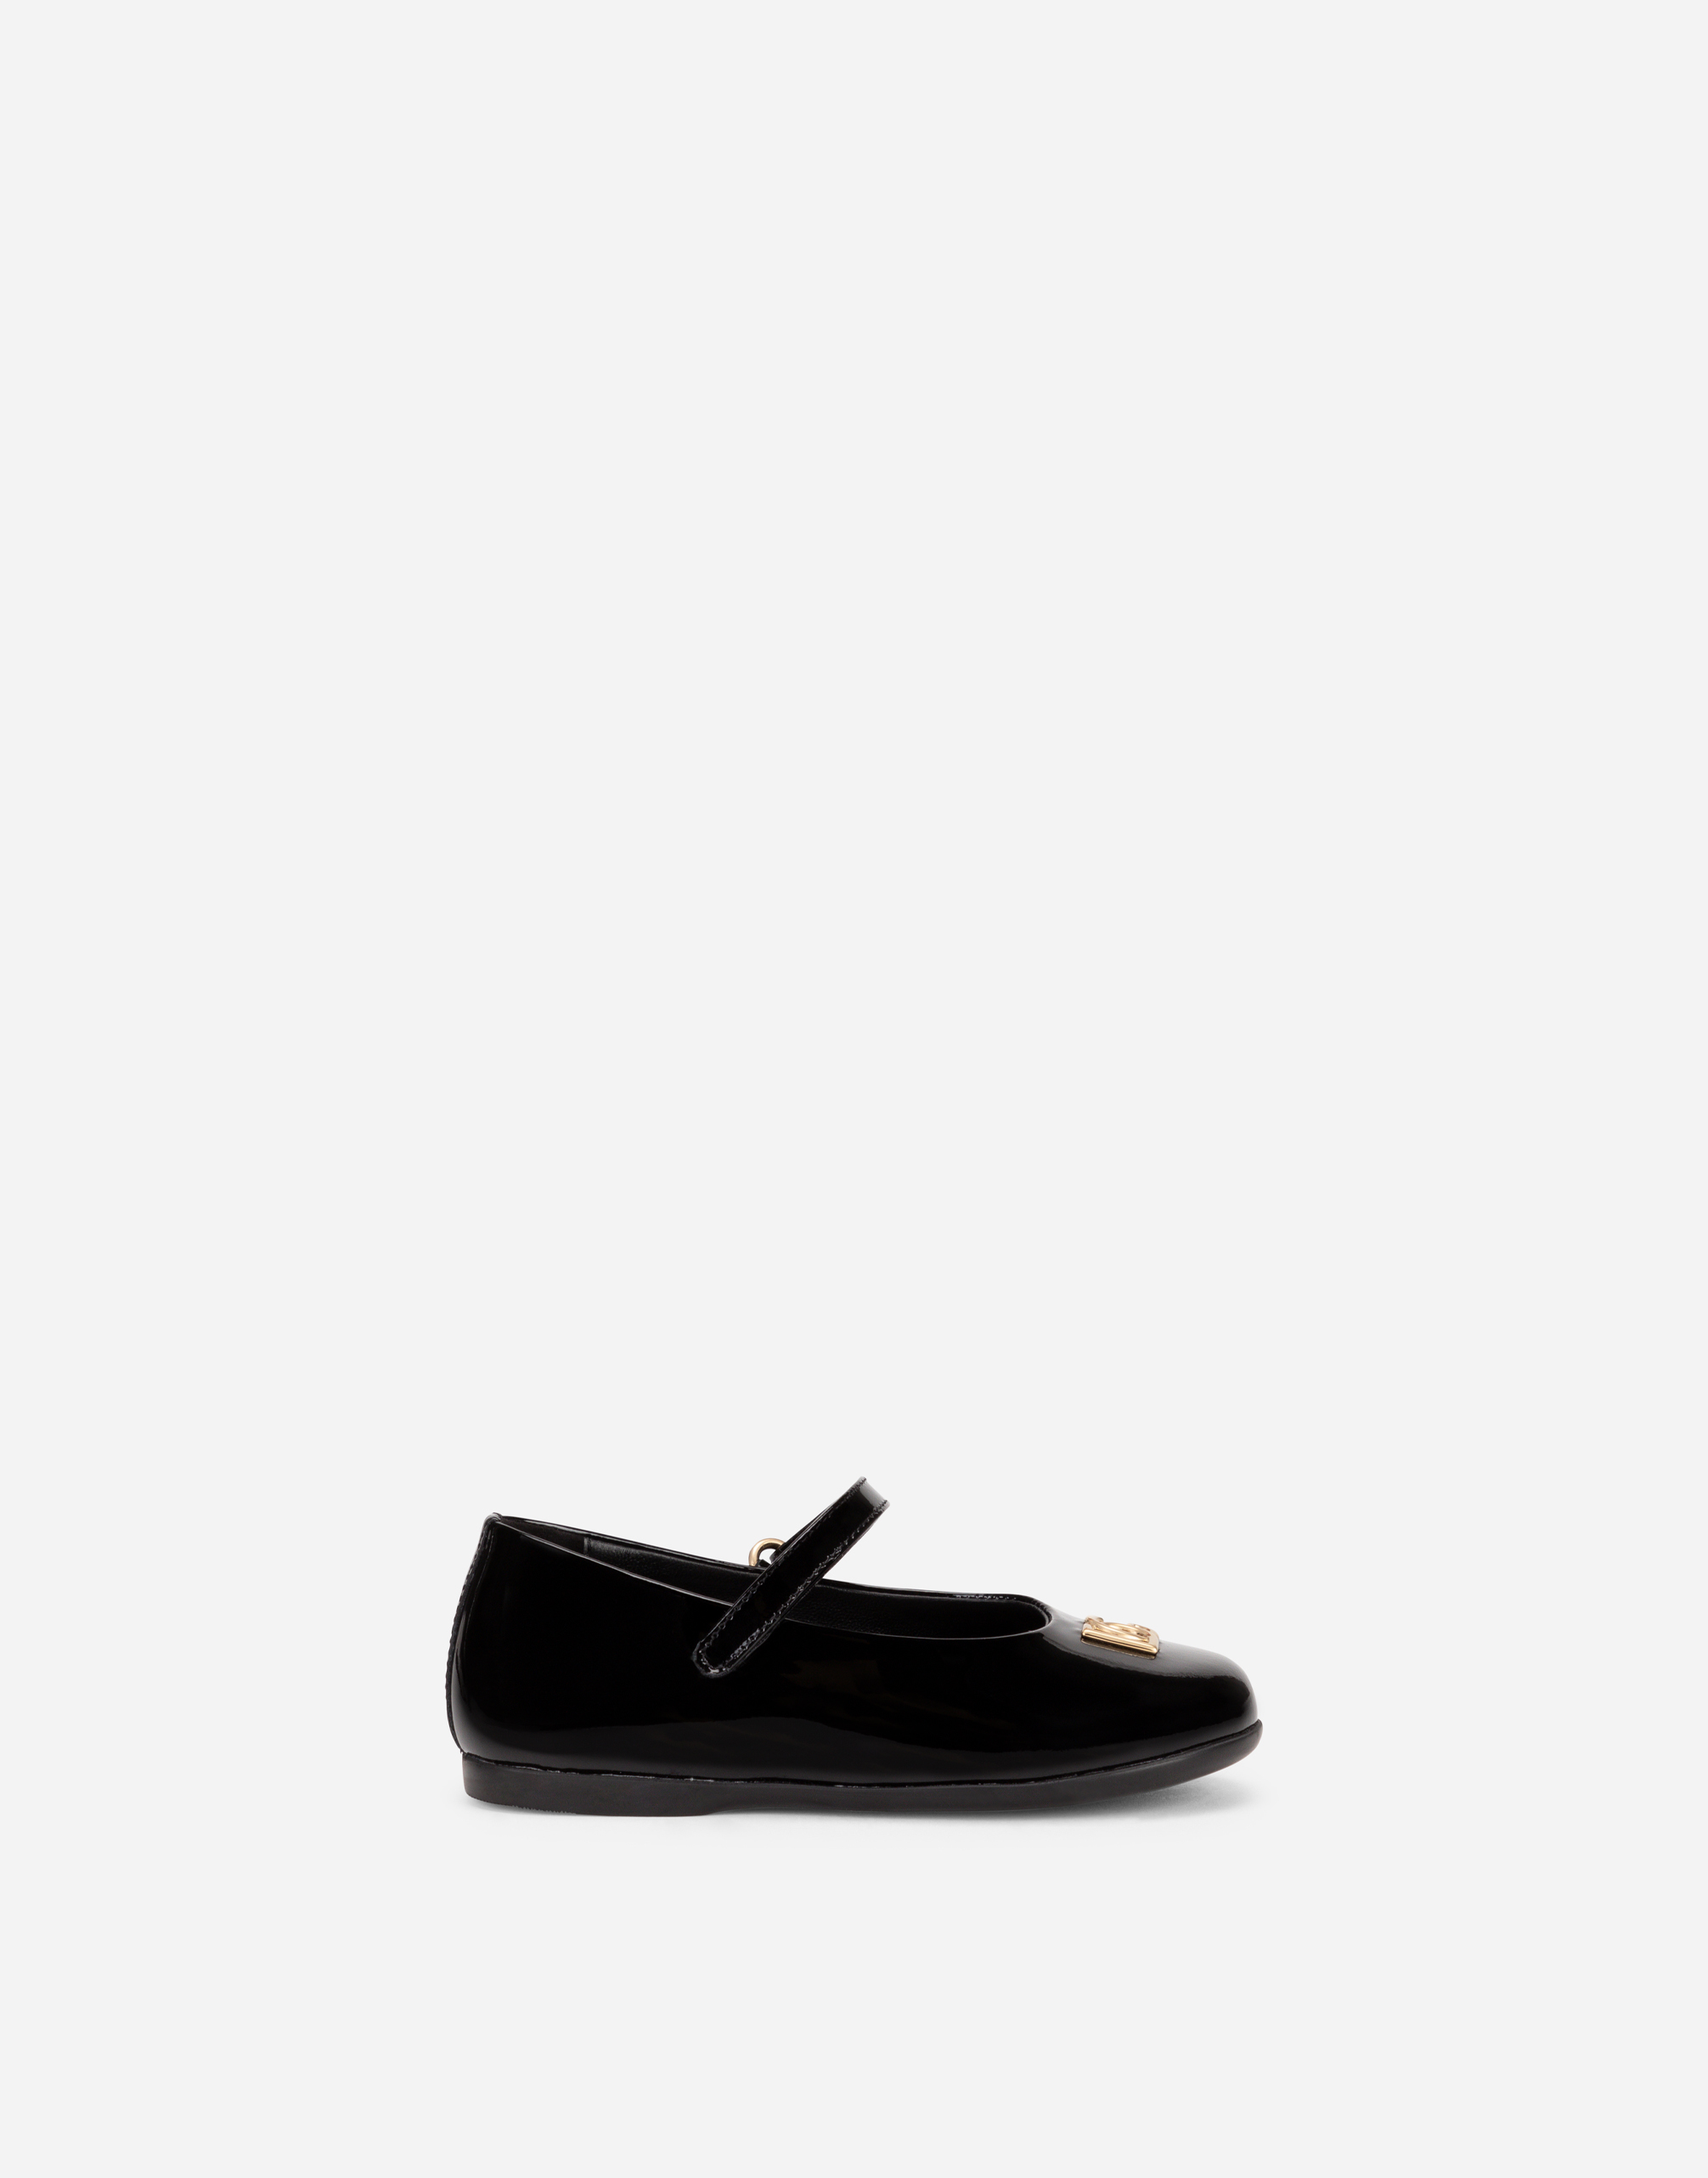 Patent leather Mary Janes with bow detail in Black